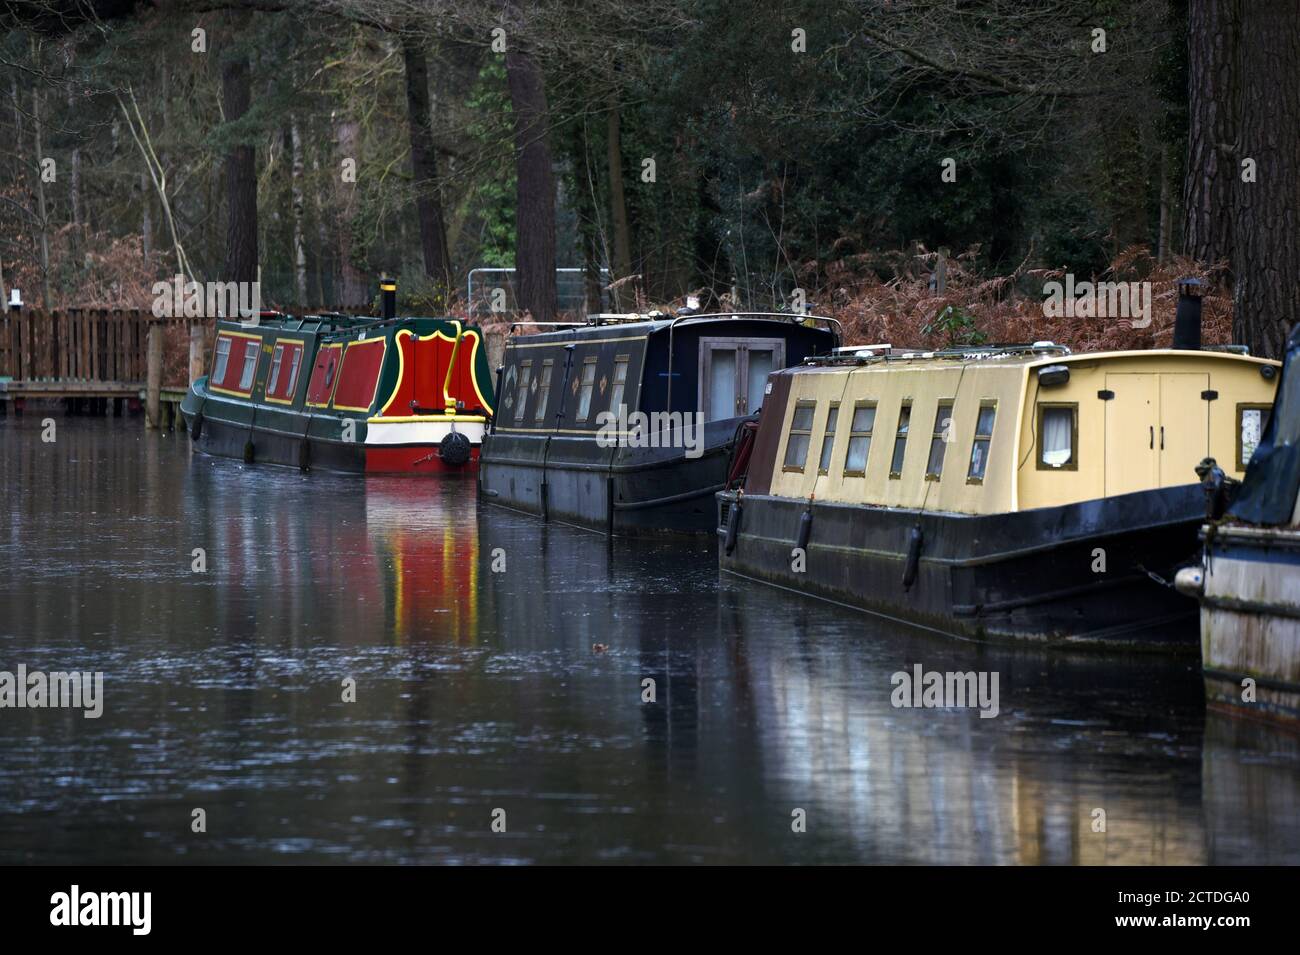 Boats are reflected in the icy waters of the beautiful Basingstoke Canal in this photo taken on a cold winter day Stock Photo